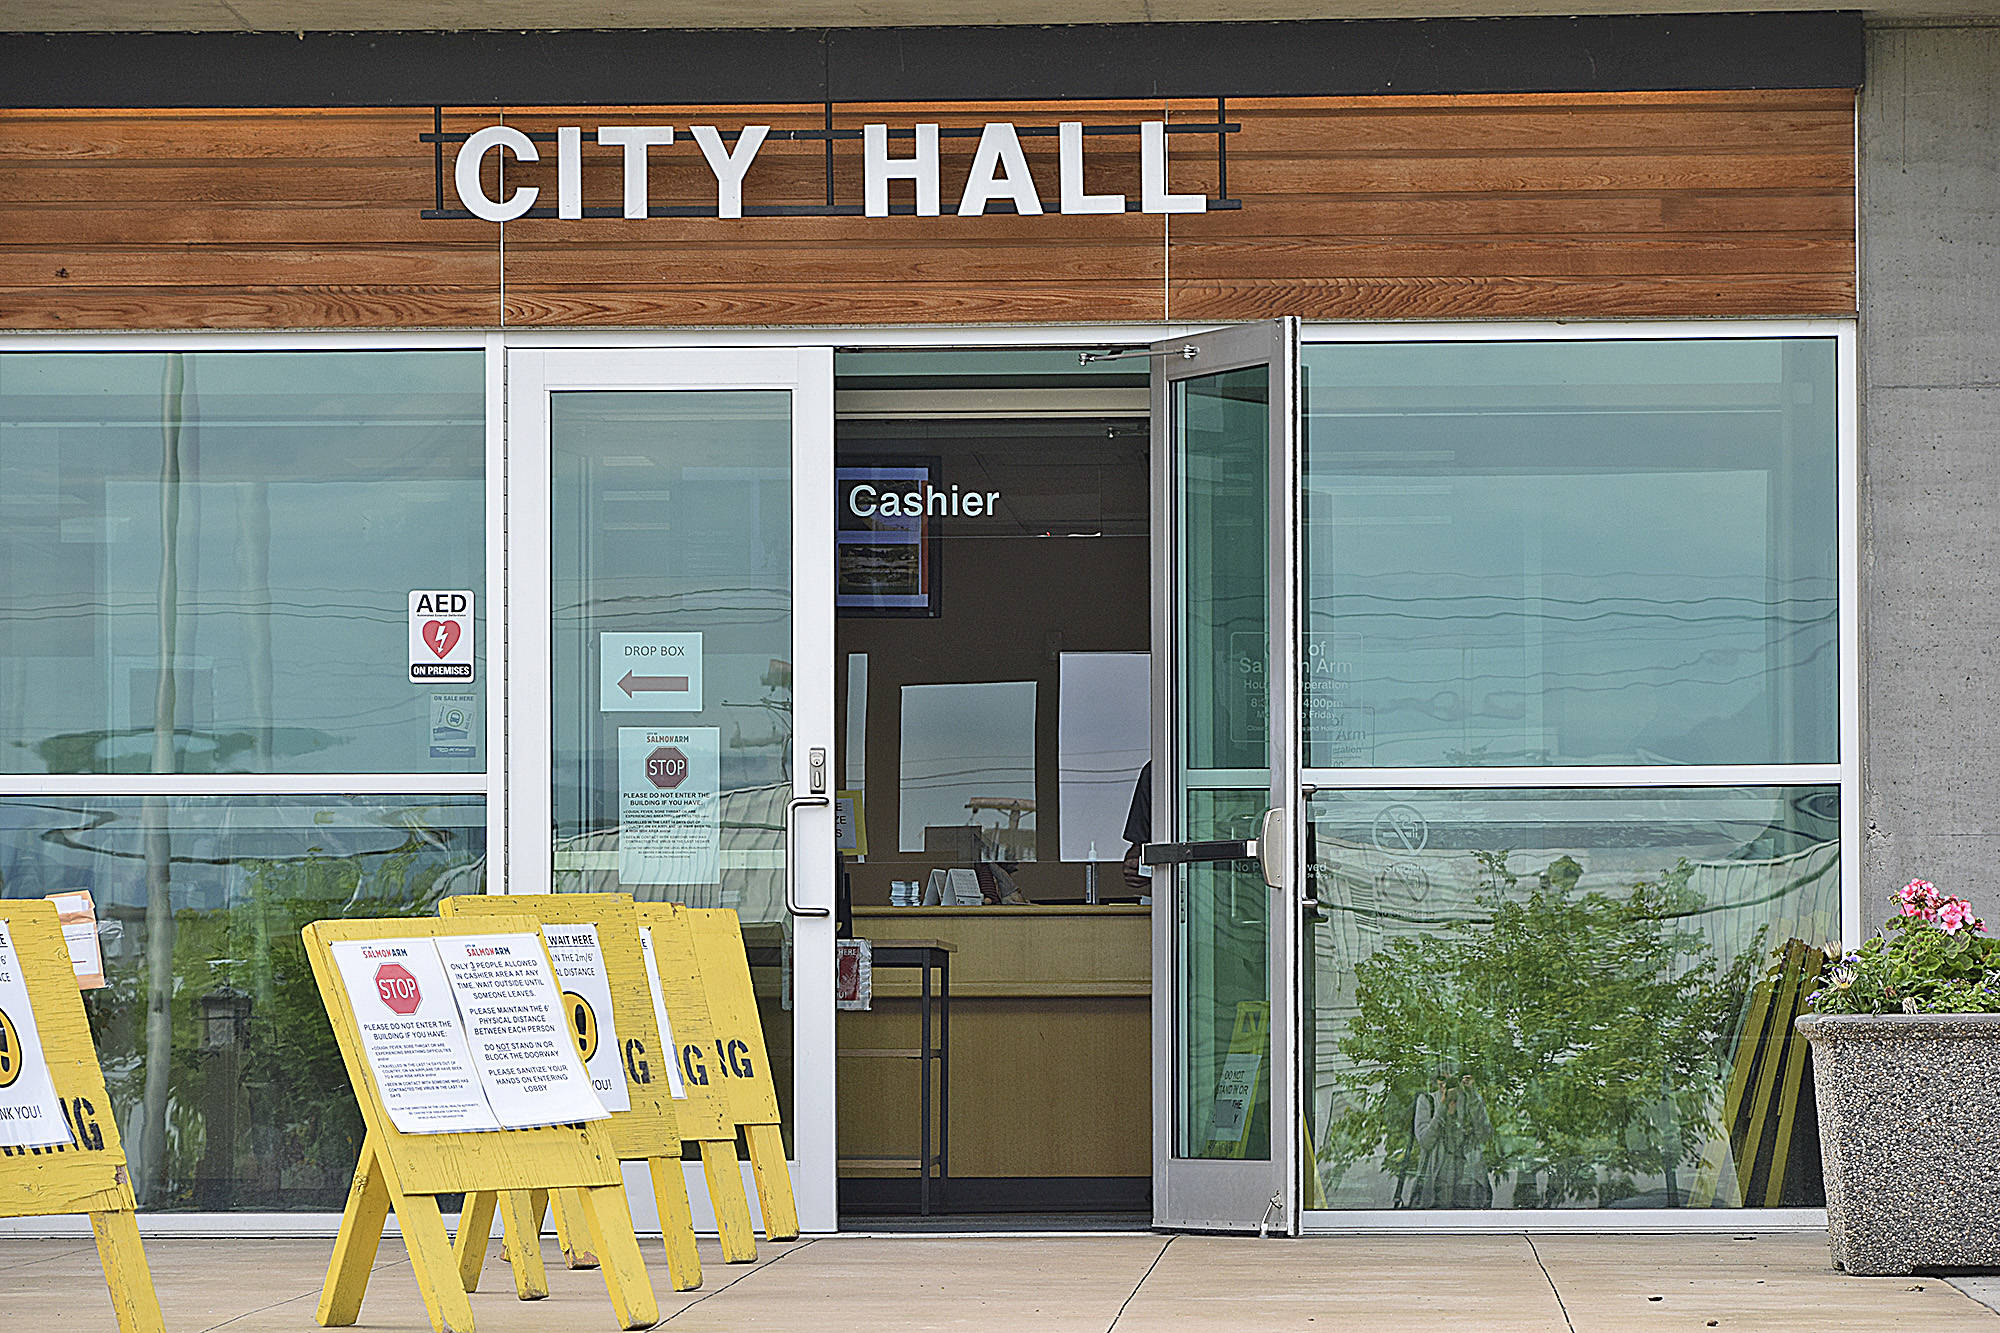 Salmon Arm Council will be considering on March 10, 2021 approval of the placing of a notice warning of building bylaw infractions on a local property. (File photo)